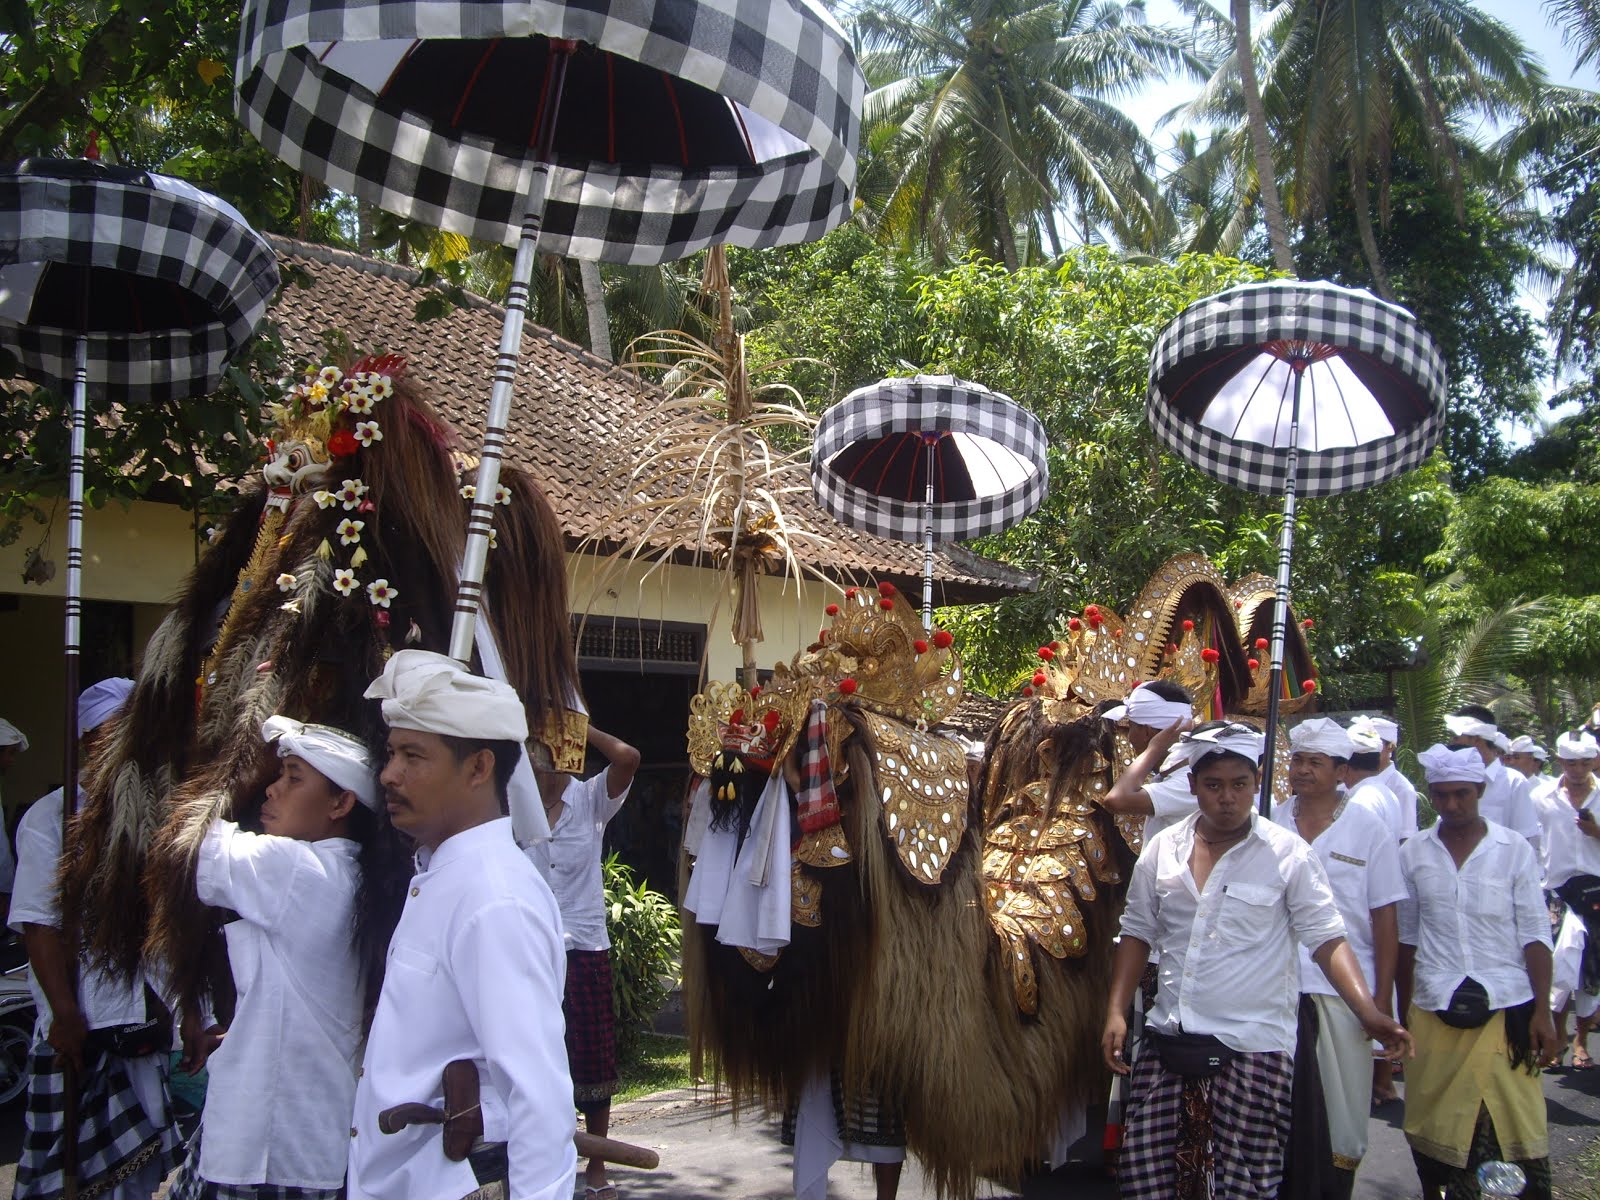 TRADITIONAL BALINESE PROCESSION THROUGH THE RICE FIELDS